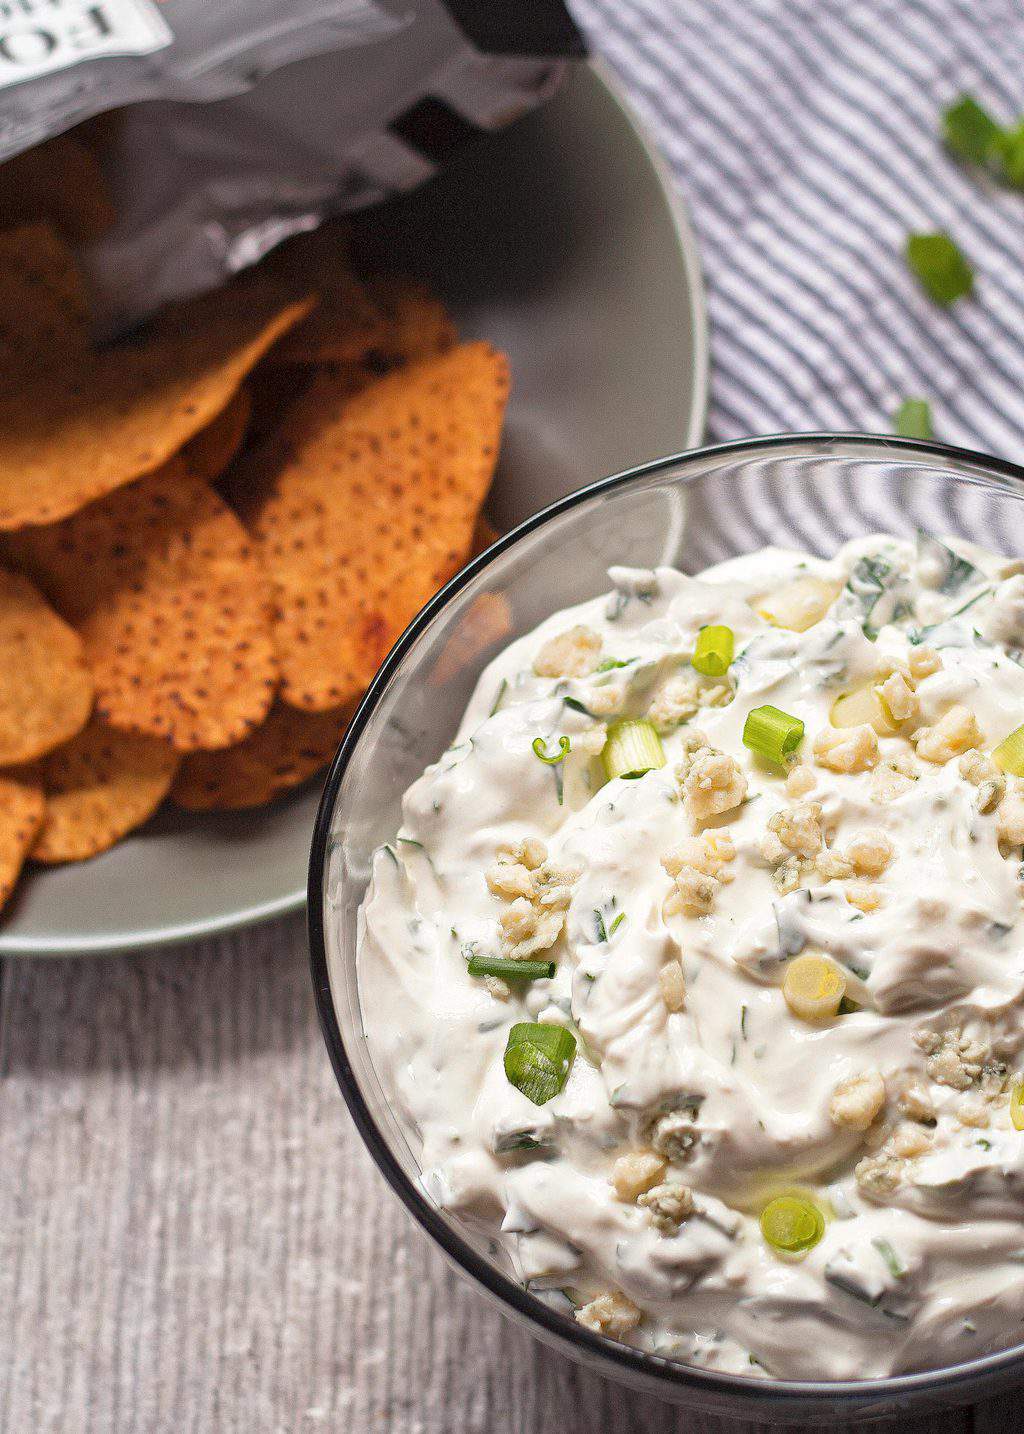 Easy Homemade Blue Cheese Dip Recipe » The Thirsty Feast